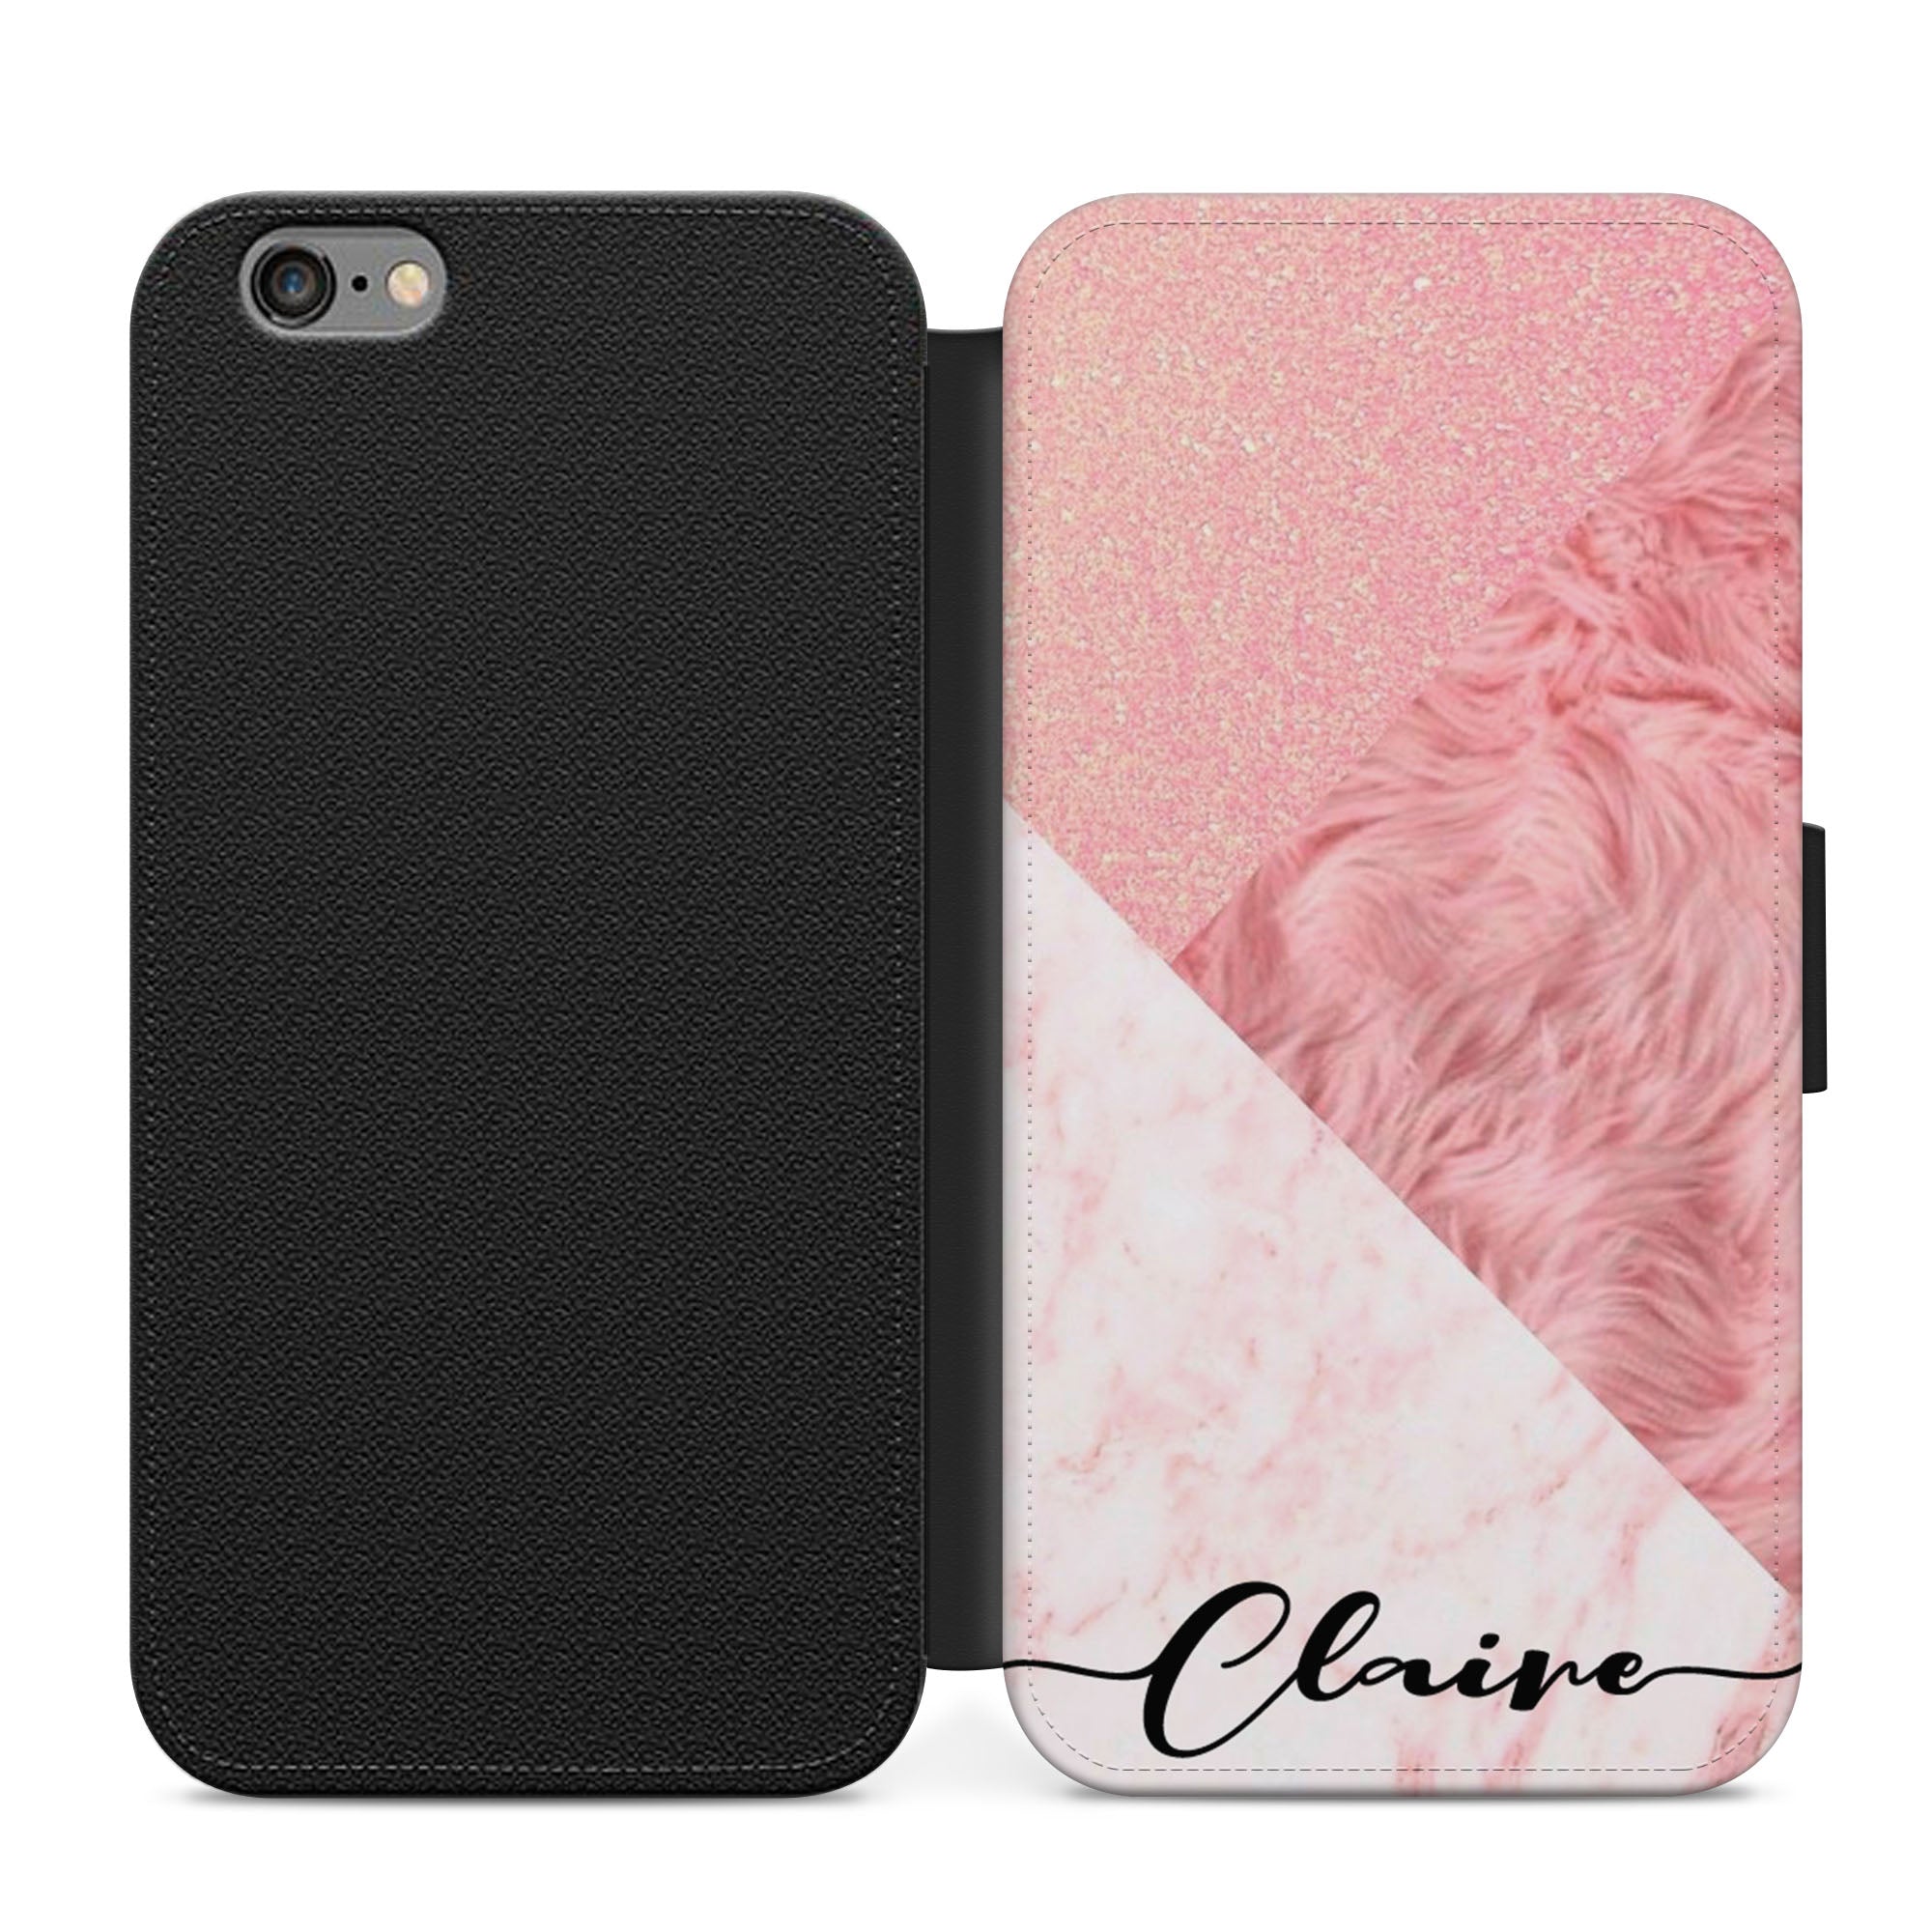 Personalised Pink Fur Faux Leather Flip Case Wallet for iPhone / Samsung